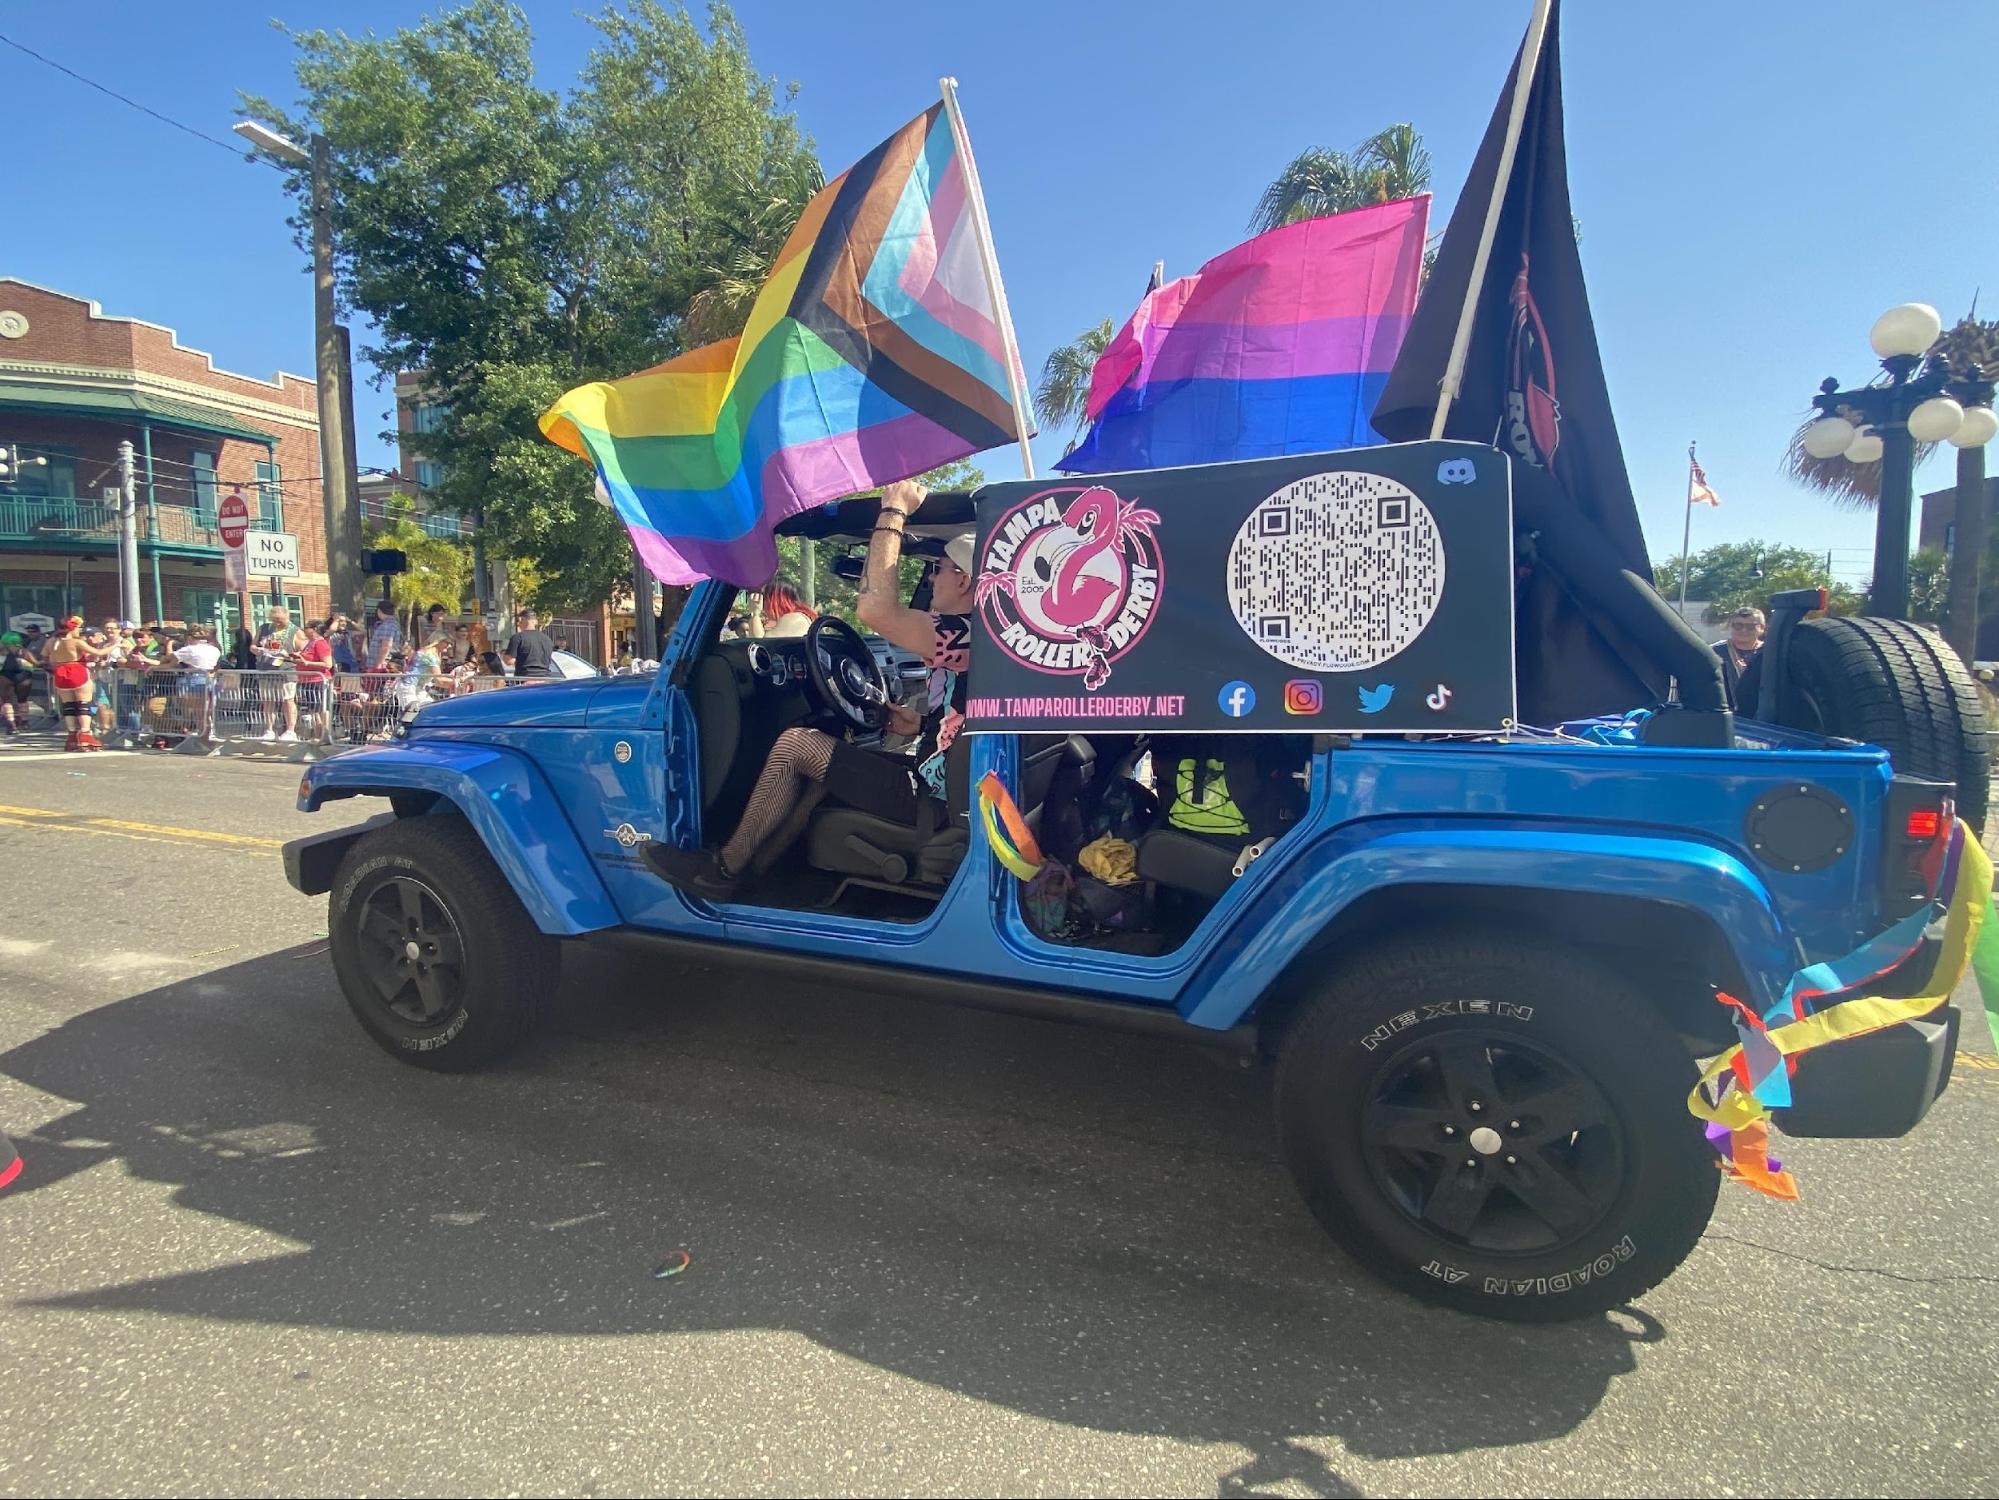 Local teams and businesses drive through the parade in Jeeps and convertibles. Tampa Roller Derby members skated through the parade and threw beads while passing out flyers for their first game.
